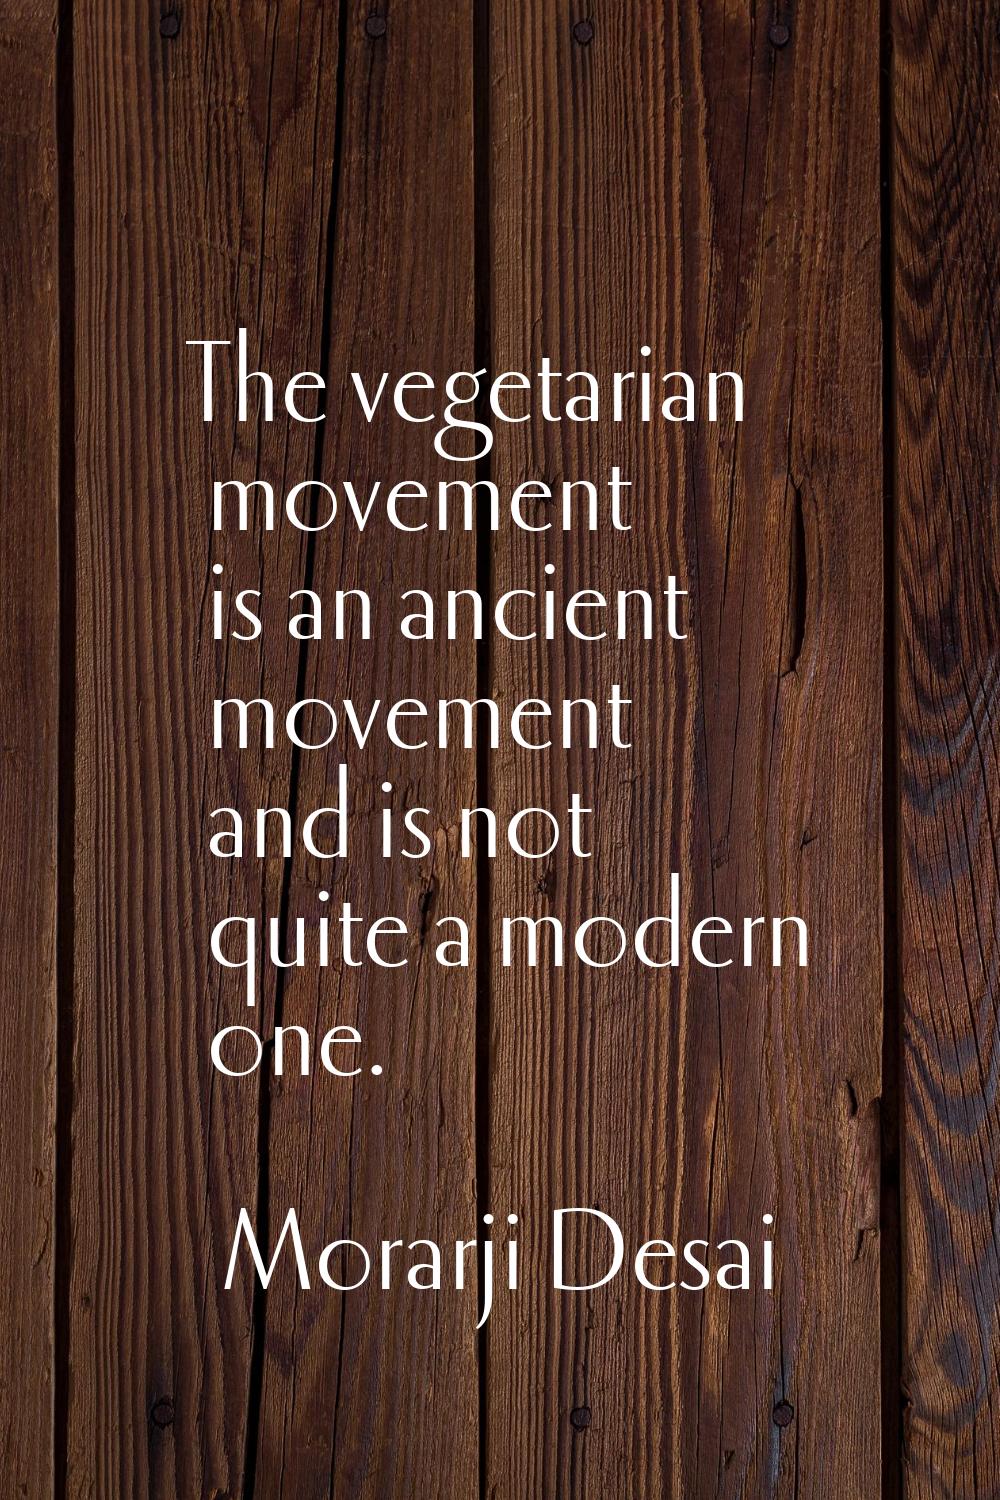 The vegetarian movement is an ancient movement and is not quite a modern one.